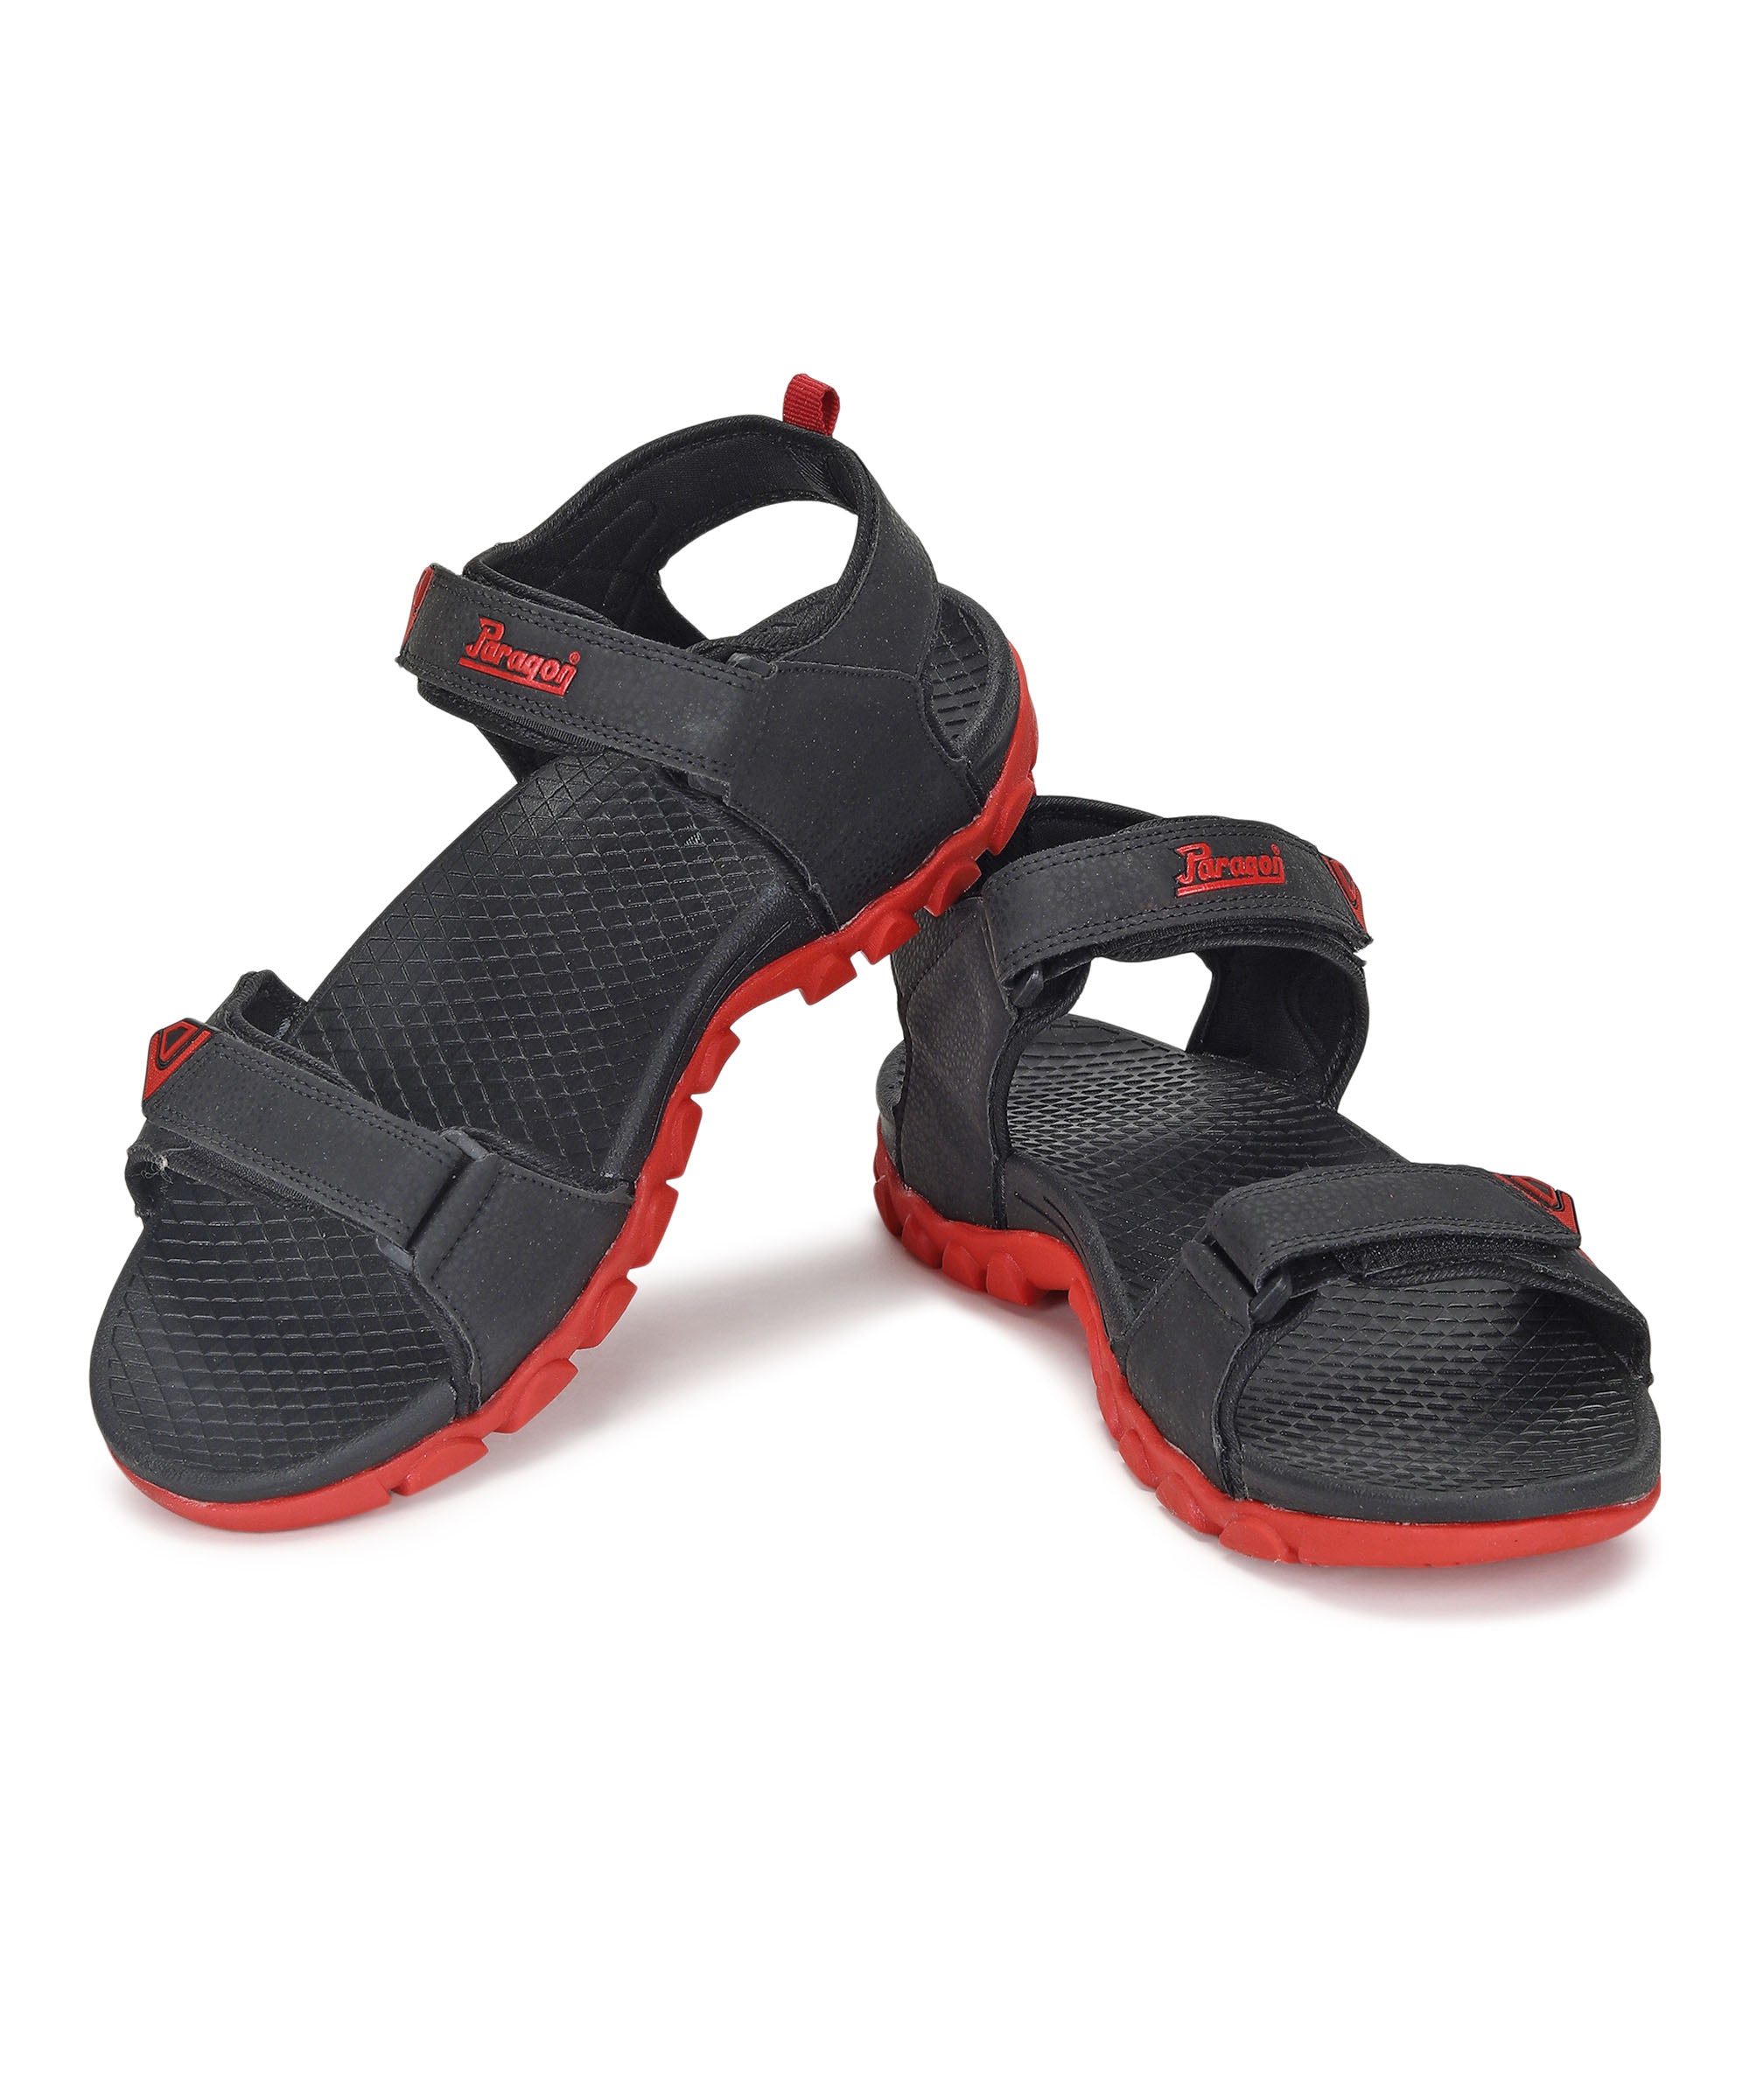 Paragon Blot K1425G Men Stylish Sandals | Comfortable Sandals for Daily Outdoor Use | Casual Formal Sandals with Cushioned Soles